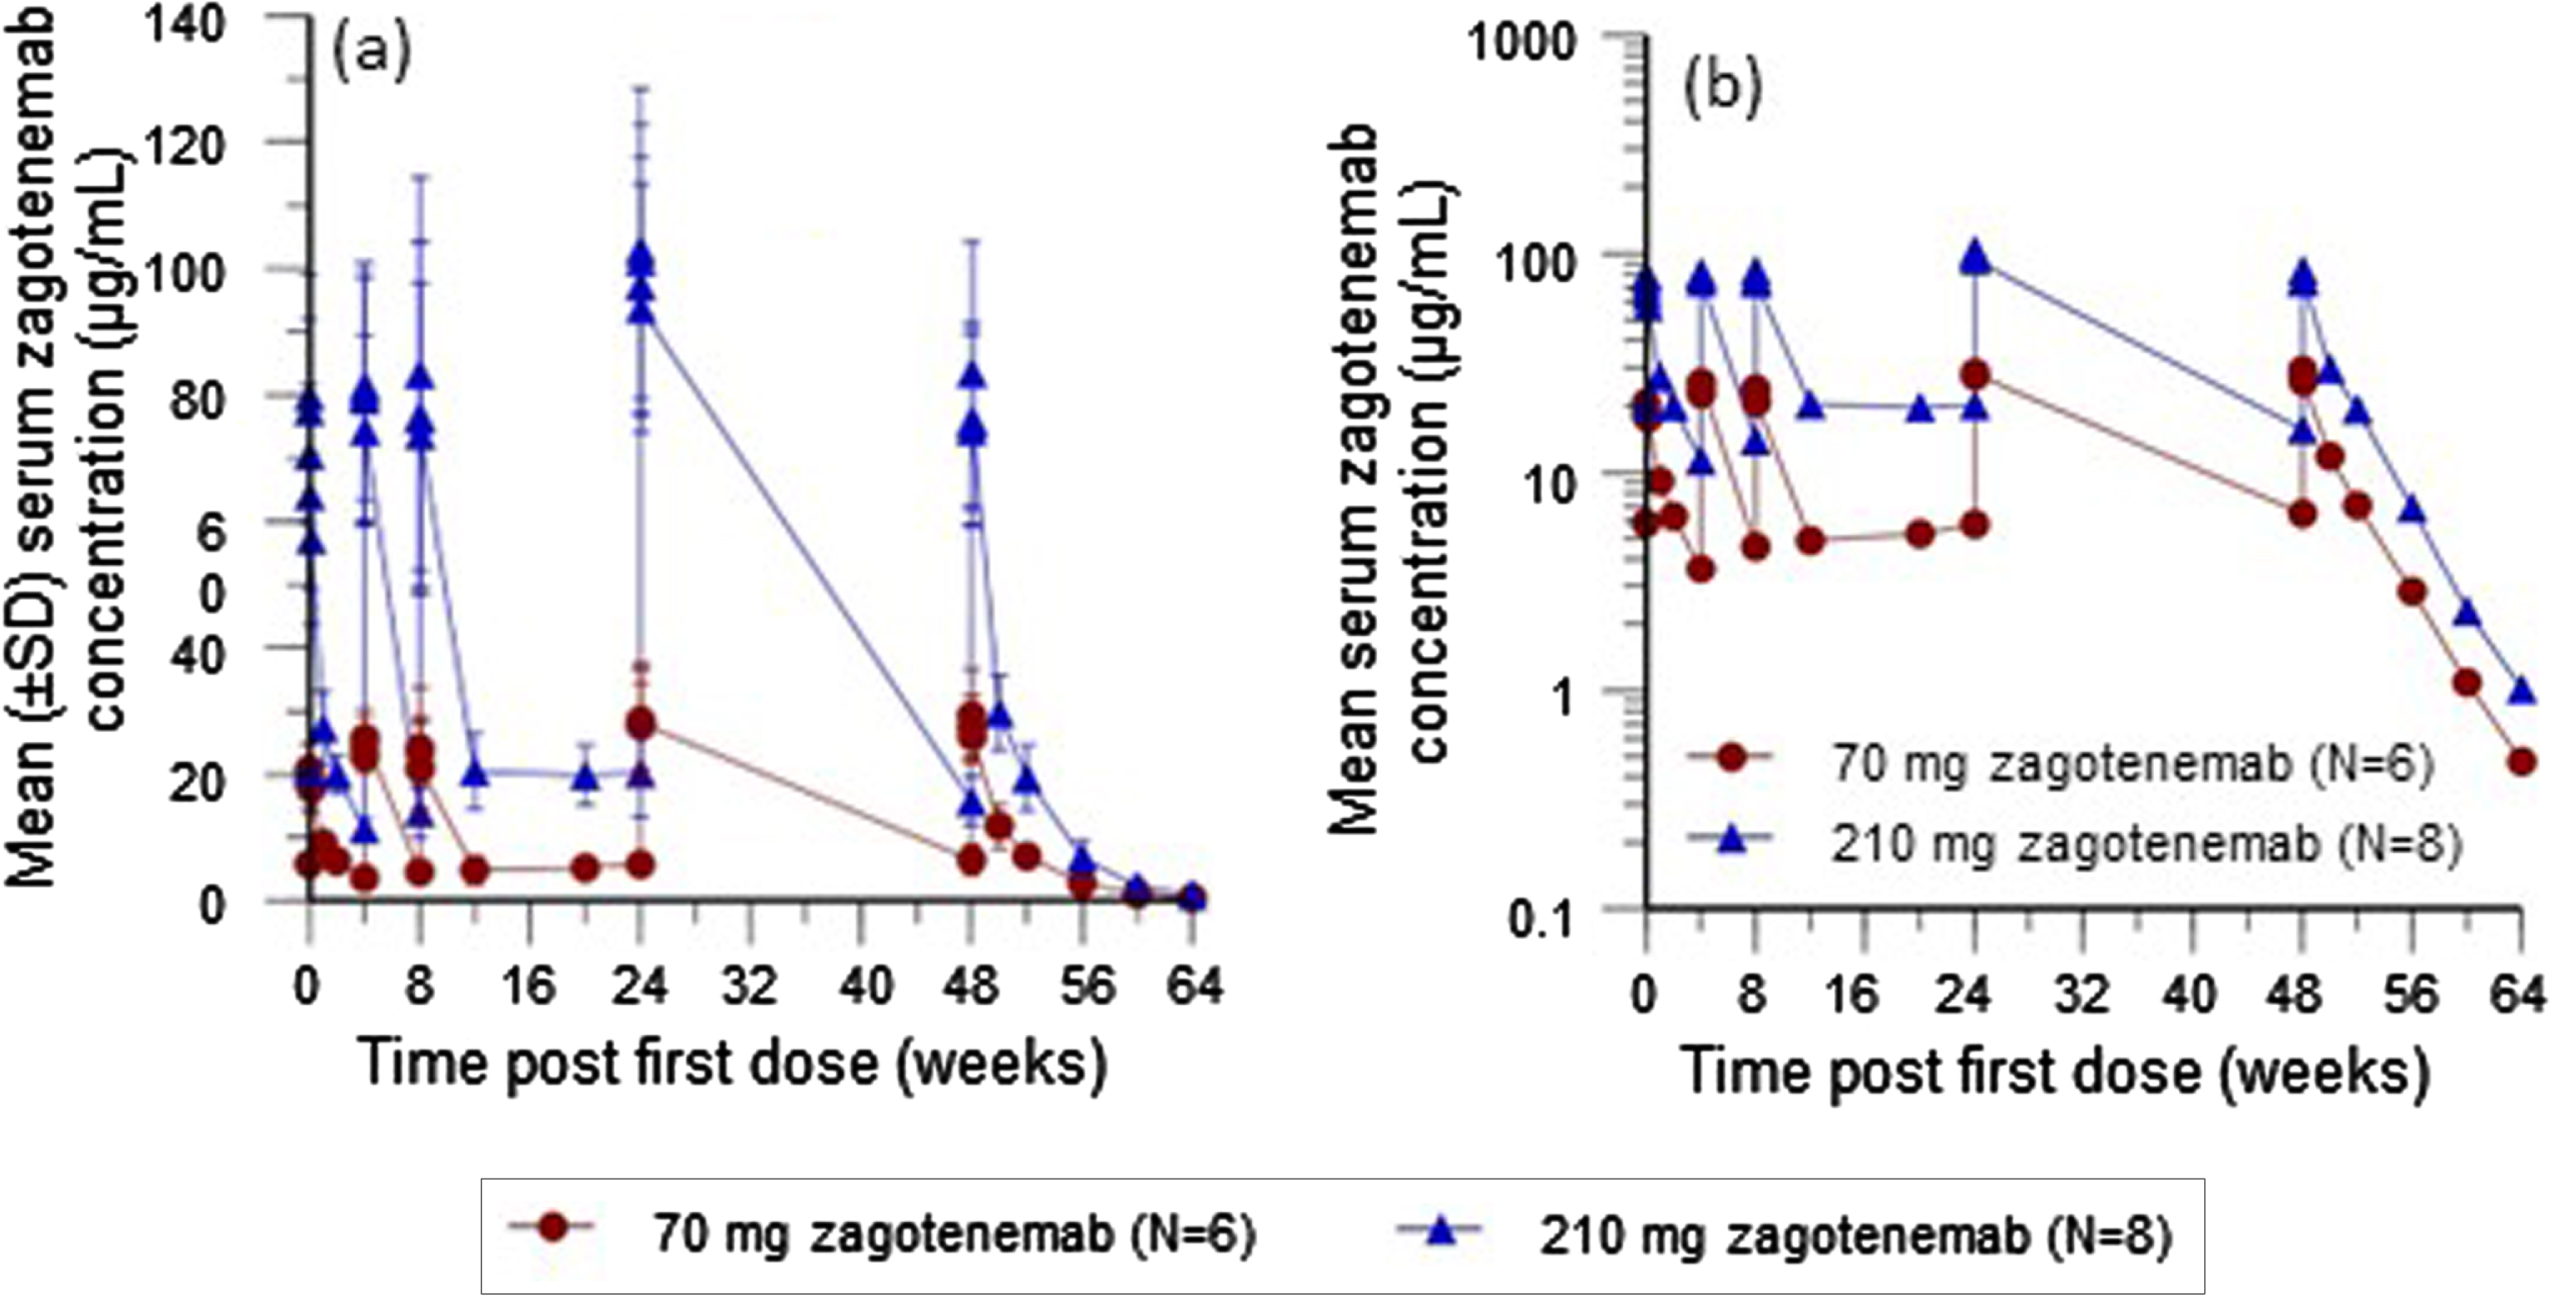 Mean serum zagotenemab concentration-time plots following multiple zagotenemab doses administered every 4 weeks: (a) linear scale; (b) semi-log scale. N, number of participants; SD, standard deviation.